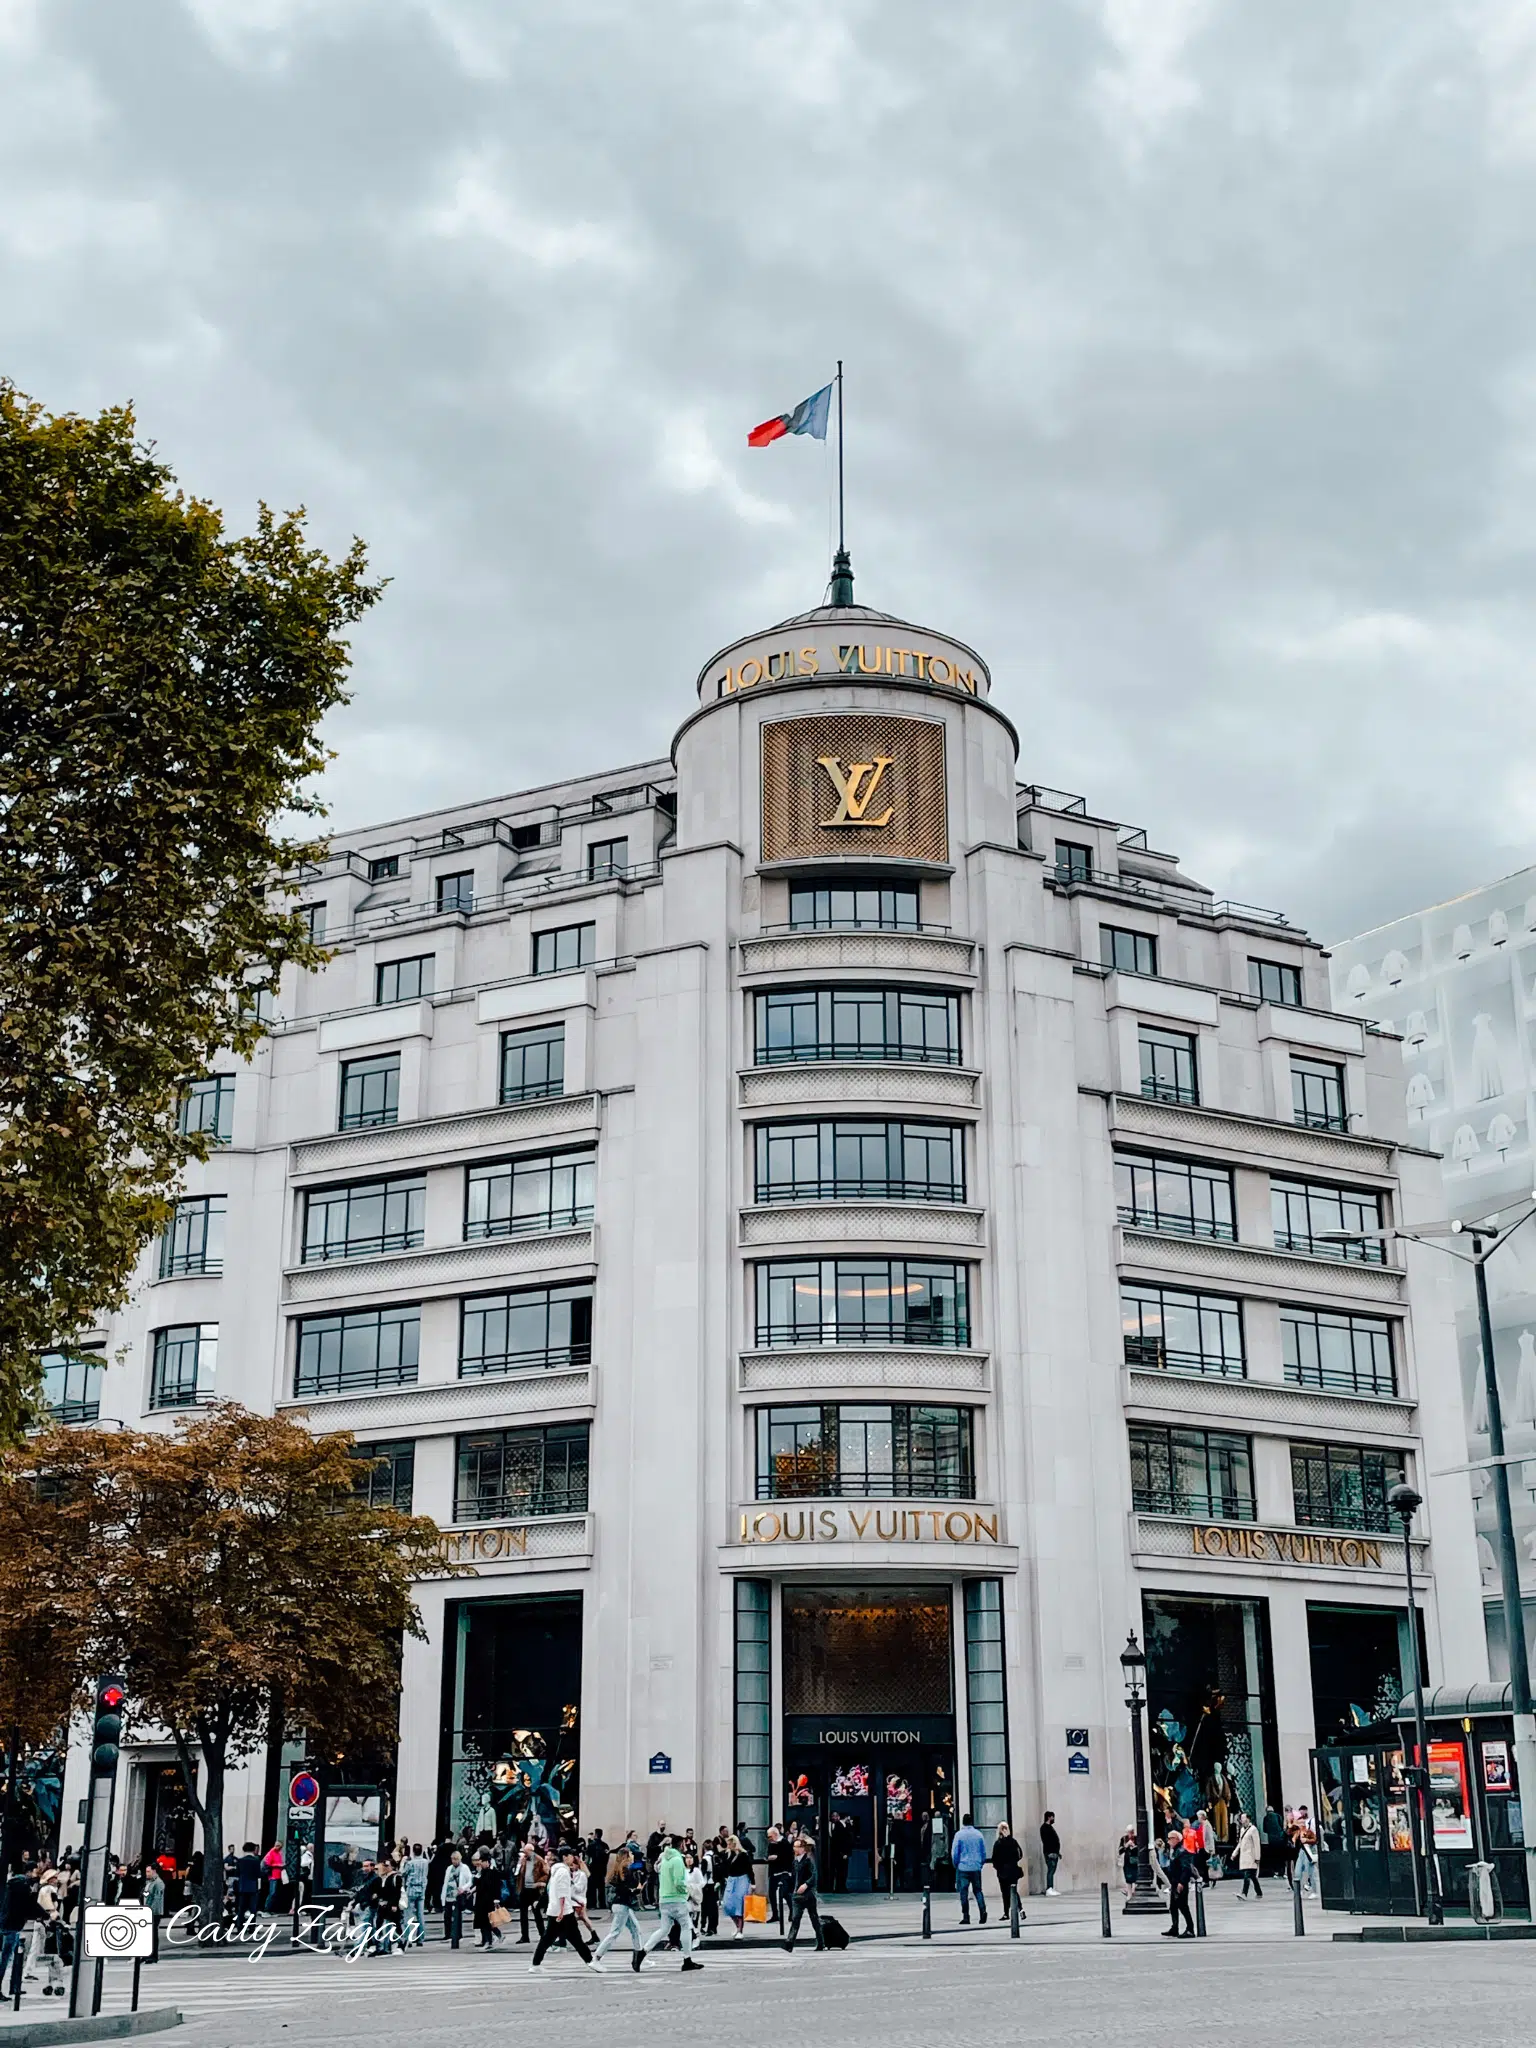 The Louis Vuitton store in Paris, the largest LV store in the world! 